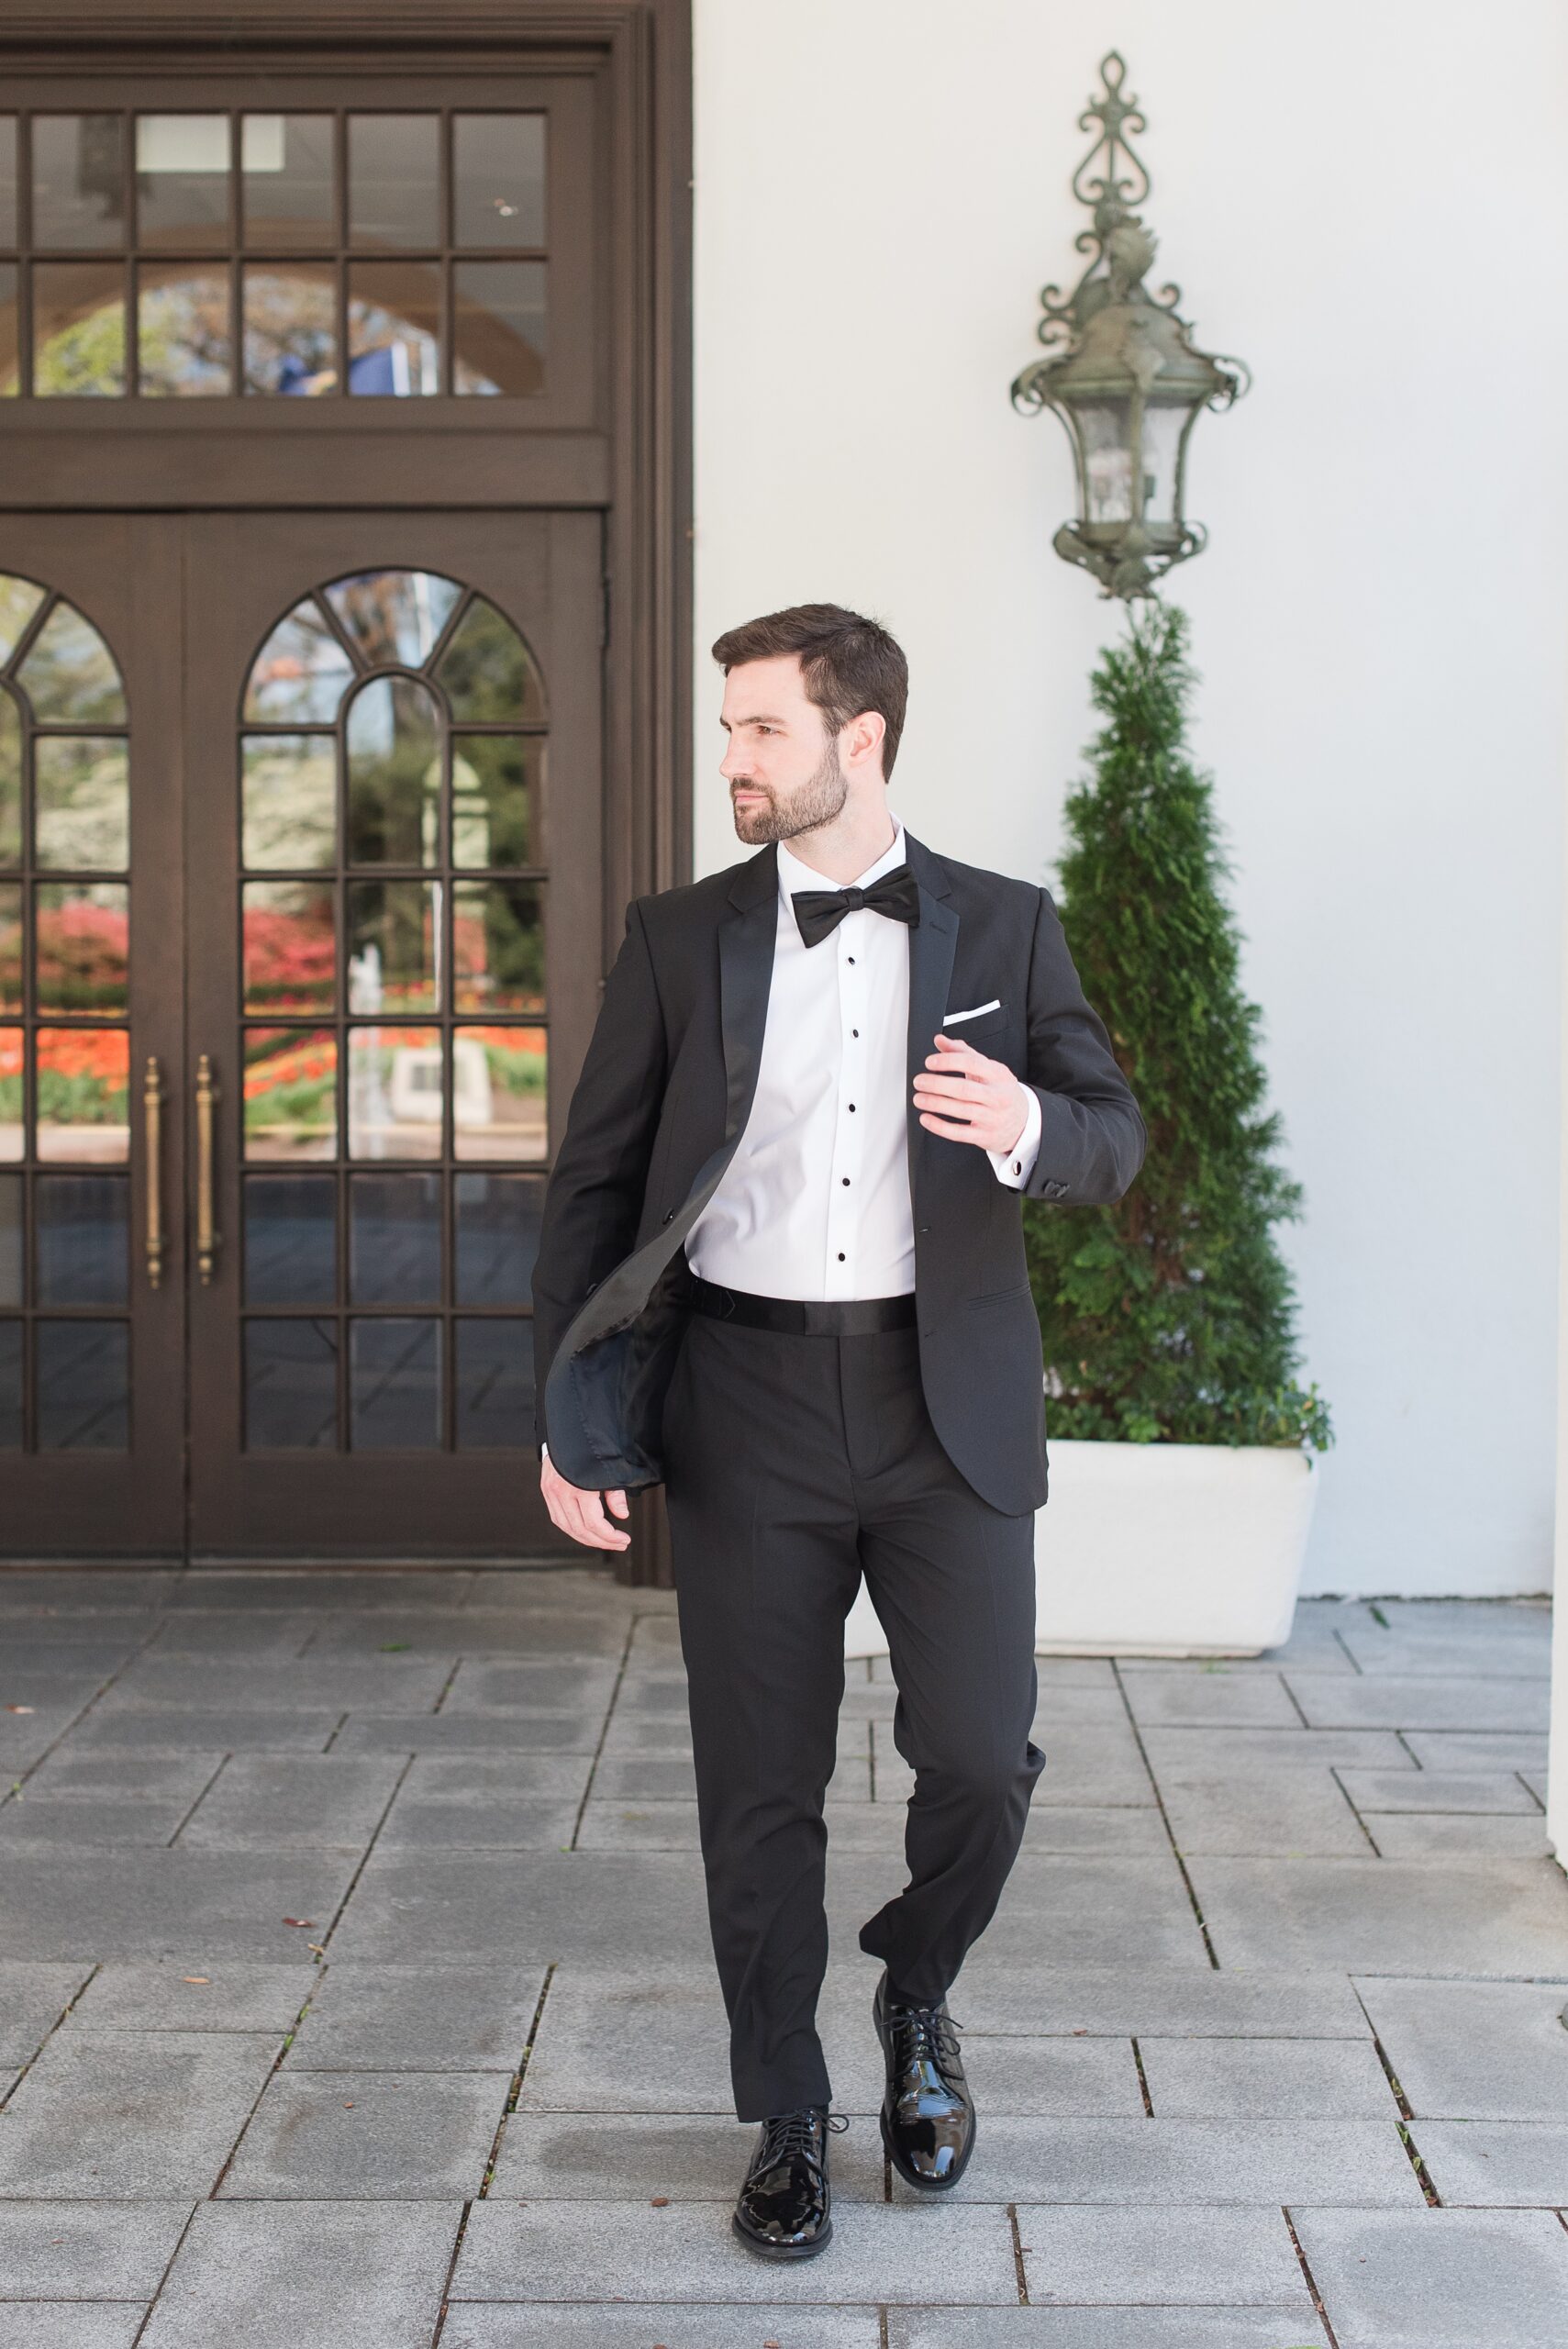 A groom in a black tuxedo walks on a stone patio with a hand on his lapel